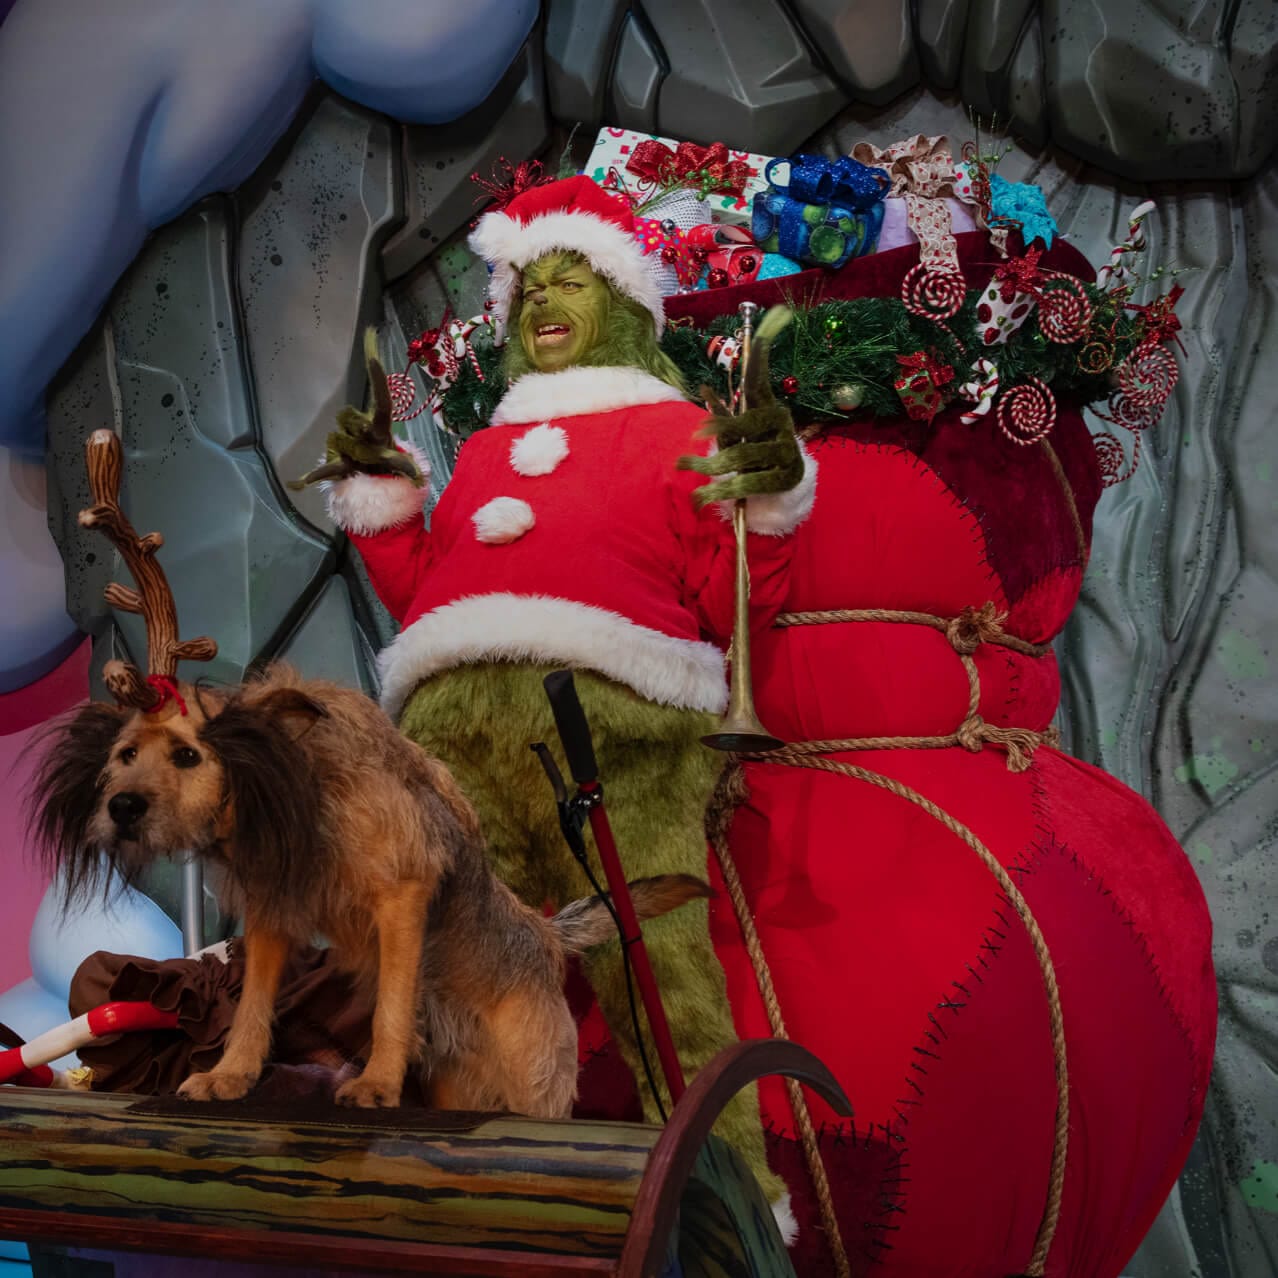 The Grinch stands in his sleigh full of presents while Max the dog wearing reindeer antlers sits at the helm in Universal Orlando's Grinchmas Who-liday Spectacular.